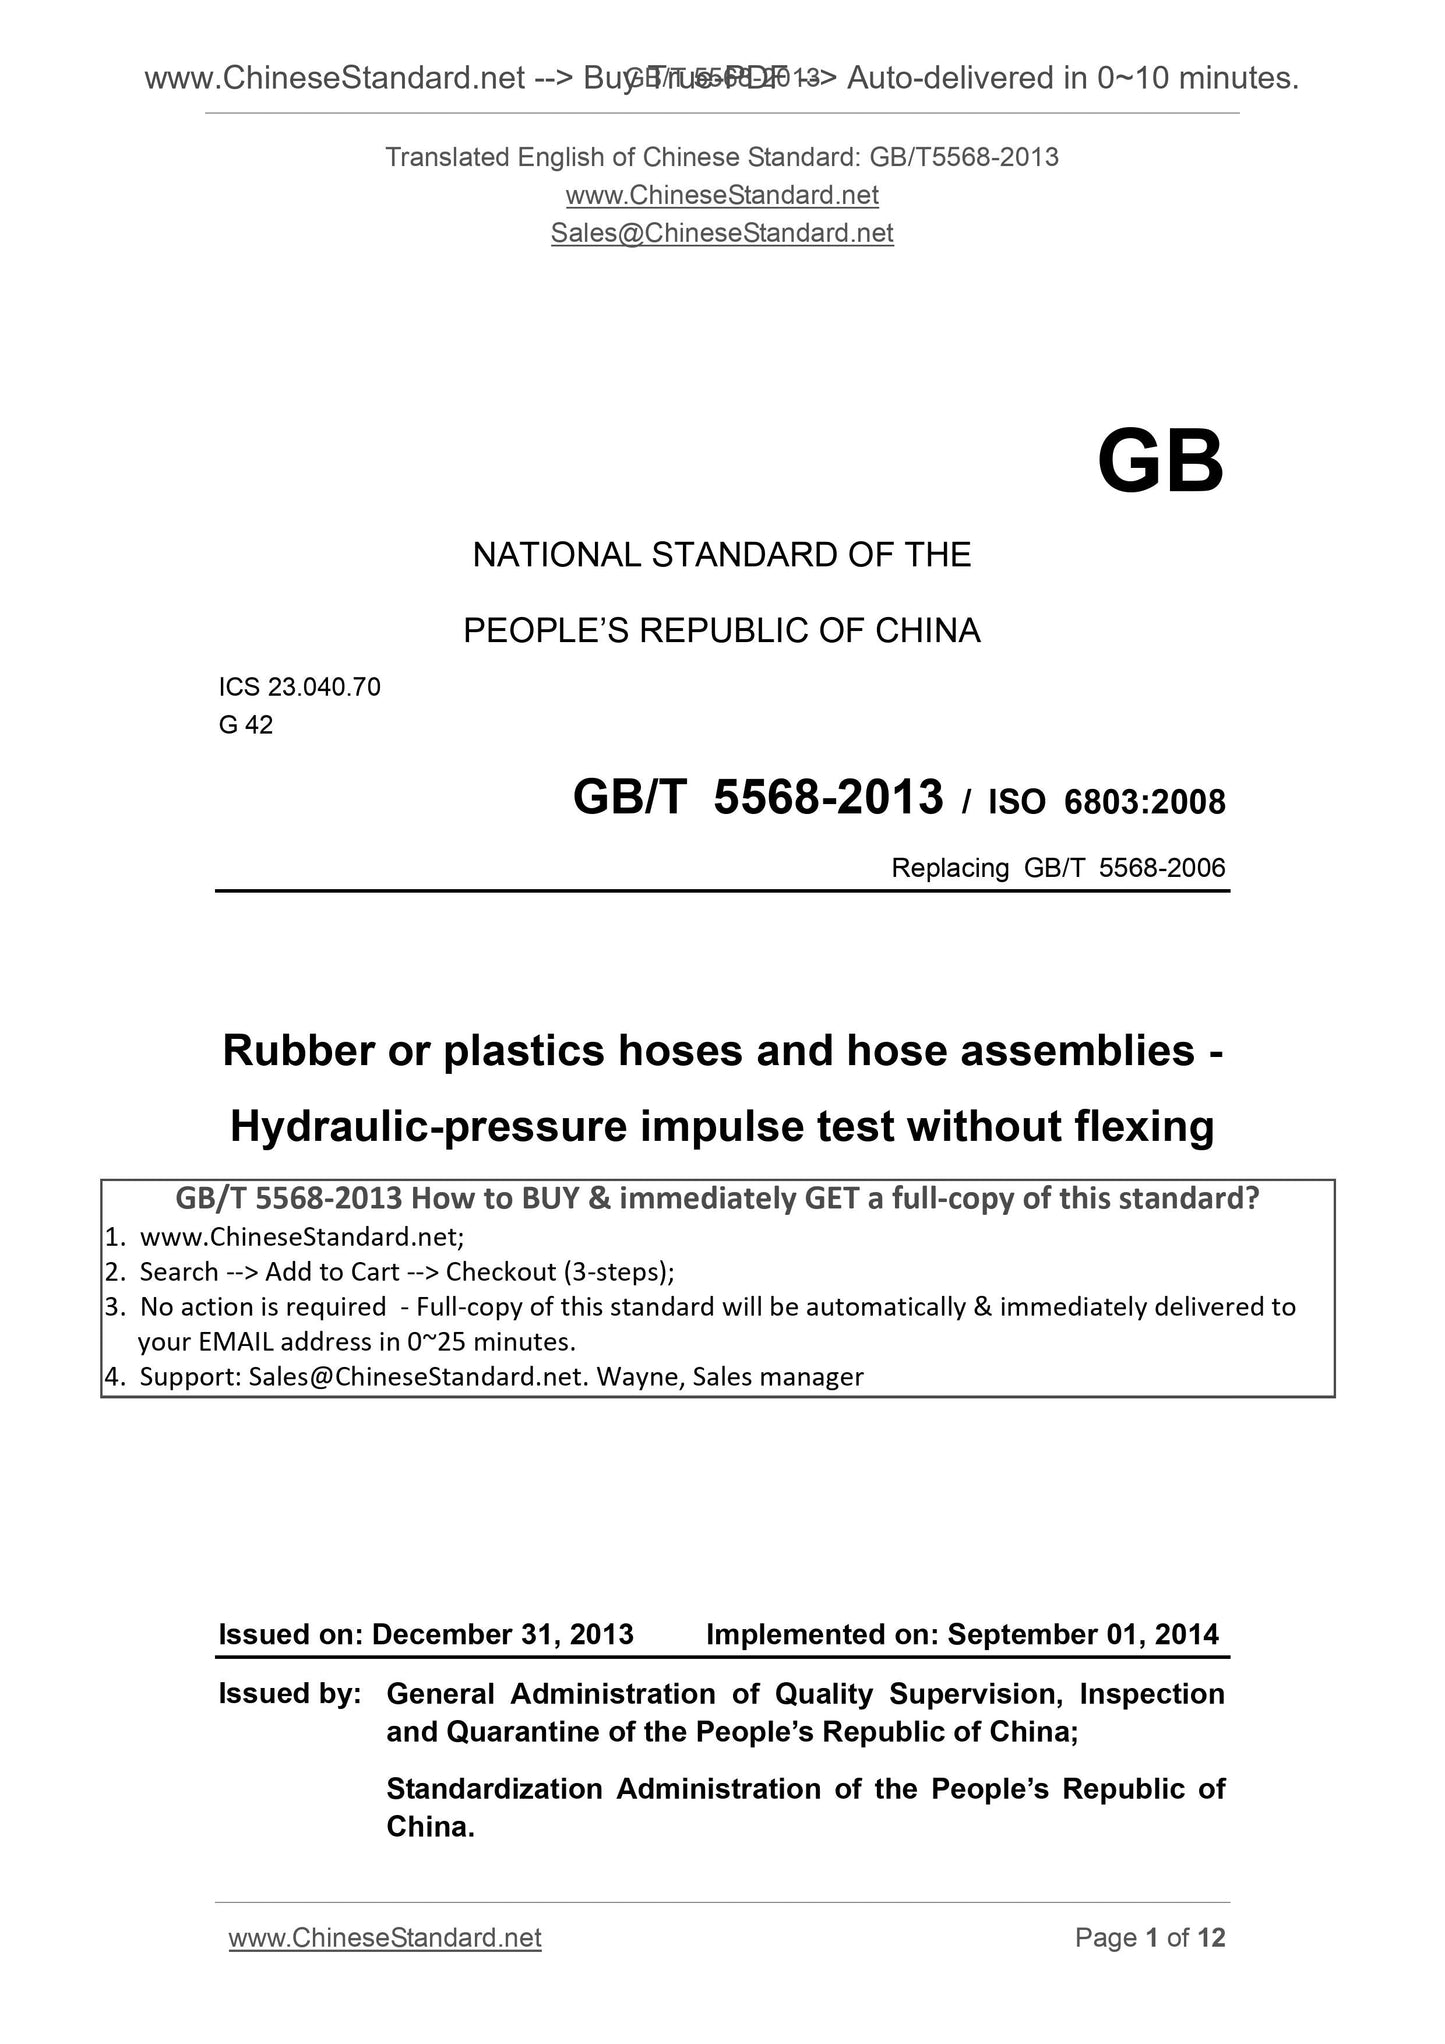 GB/T 5568-2013 Page 1